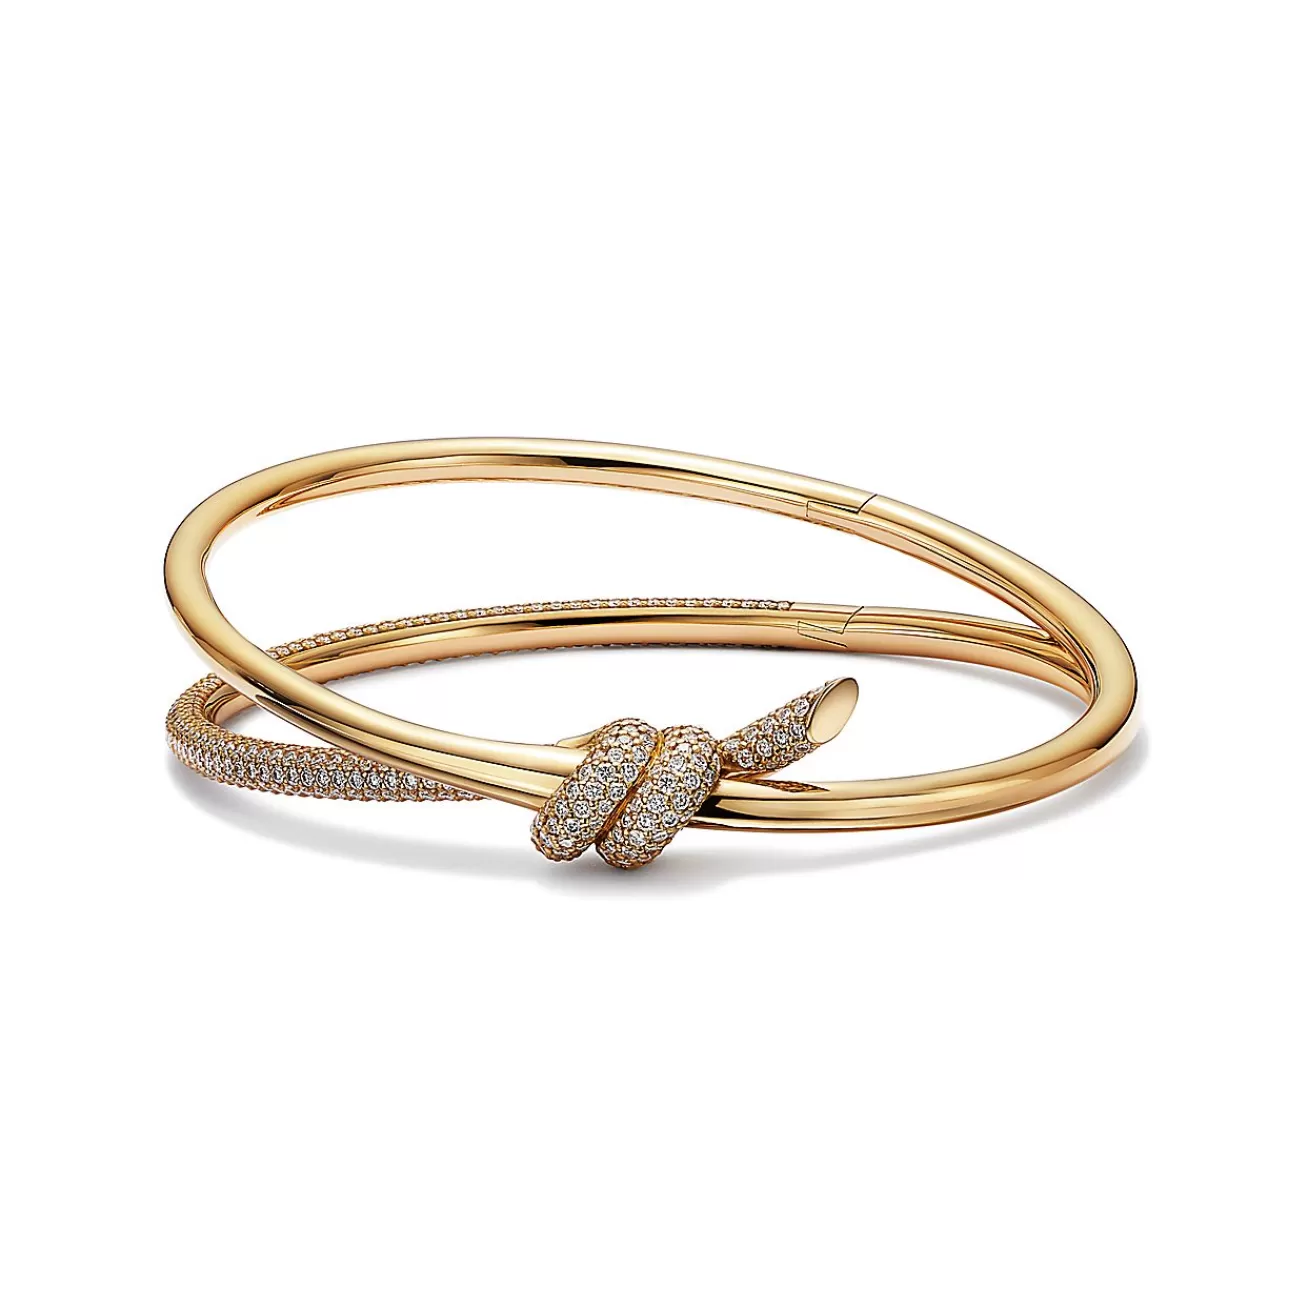 Tiffany & Co. Tiffany Knot Double Row Hinged Bangle in Yellow Gold with Diamonds | ^ Bracelets | Gold Jewelry